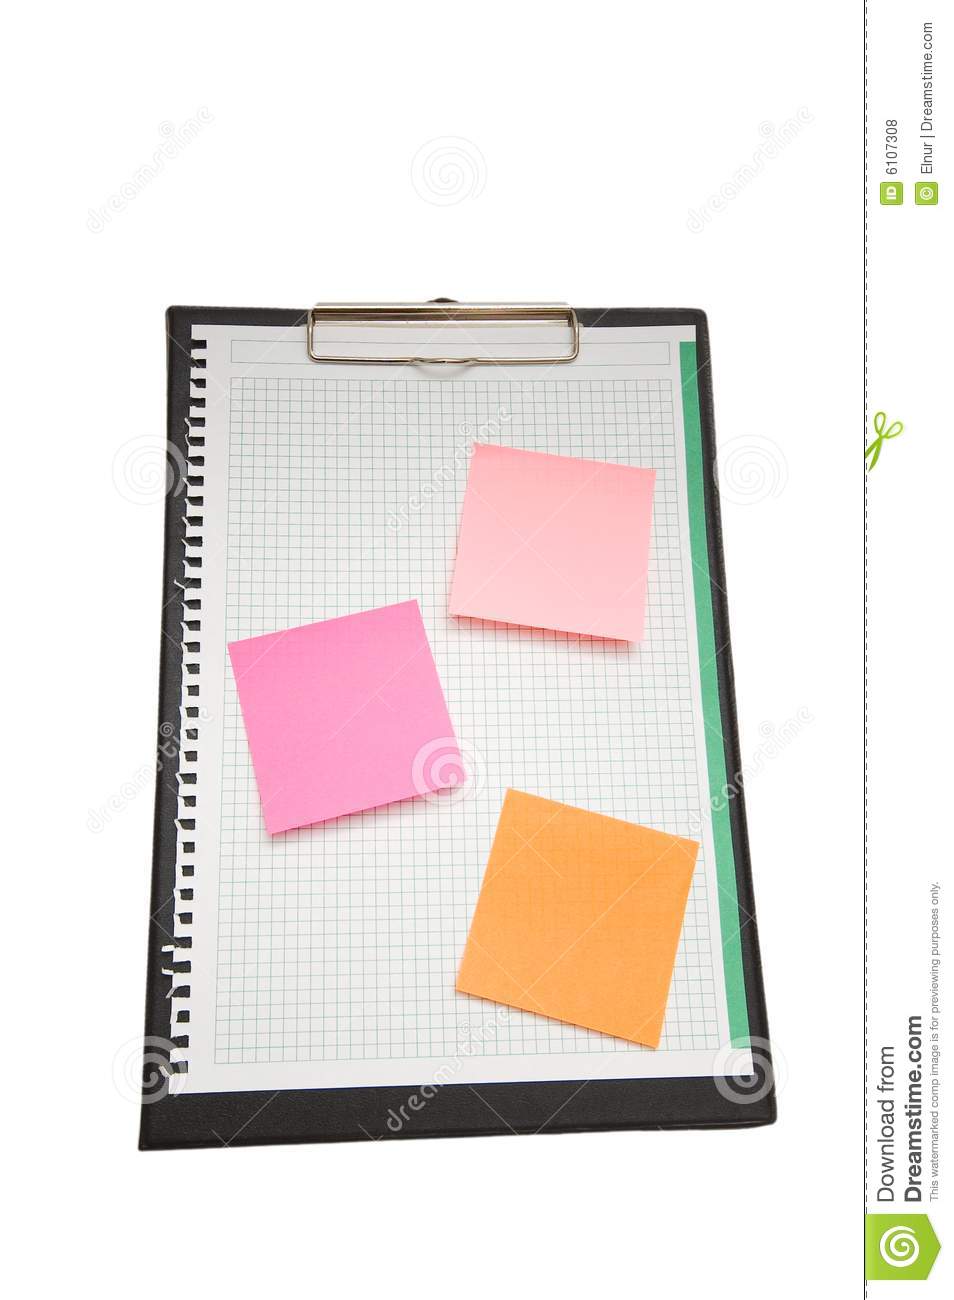 Open Binder With Post It Notes Royalty Free Stock Photos   Image